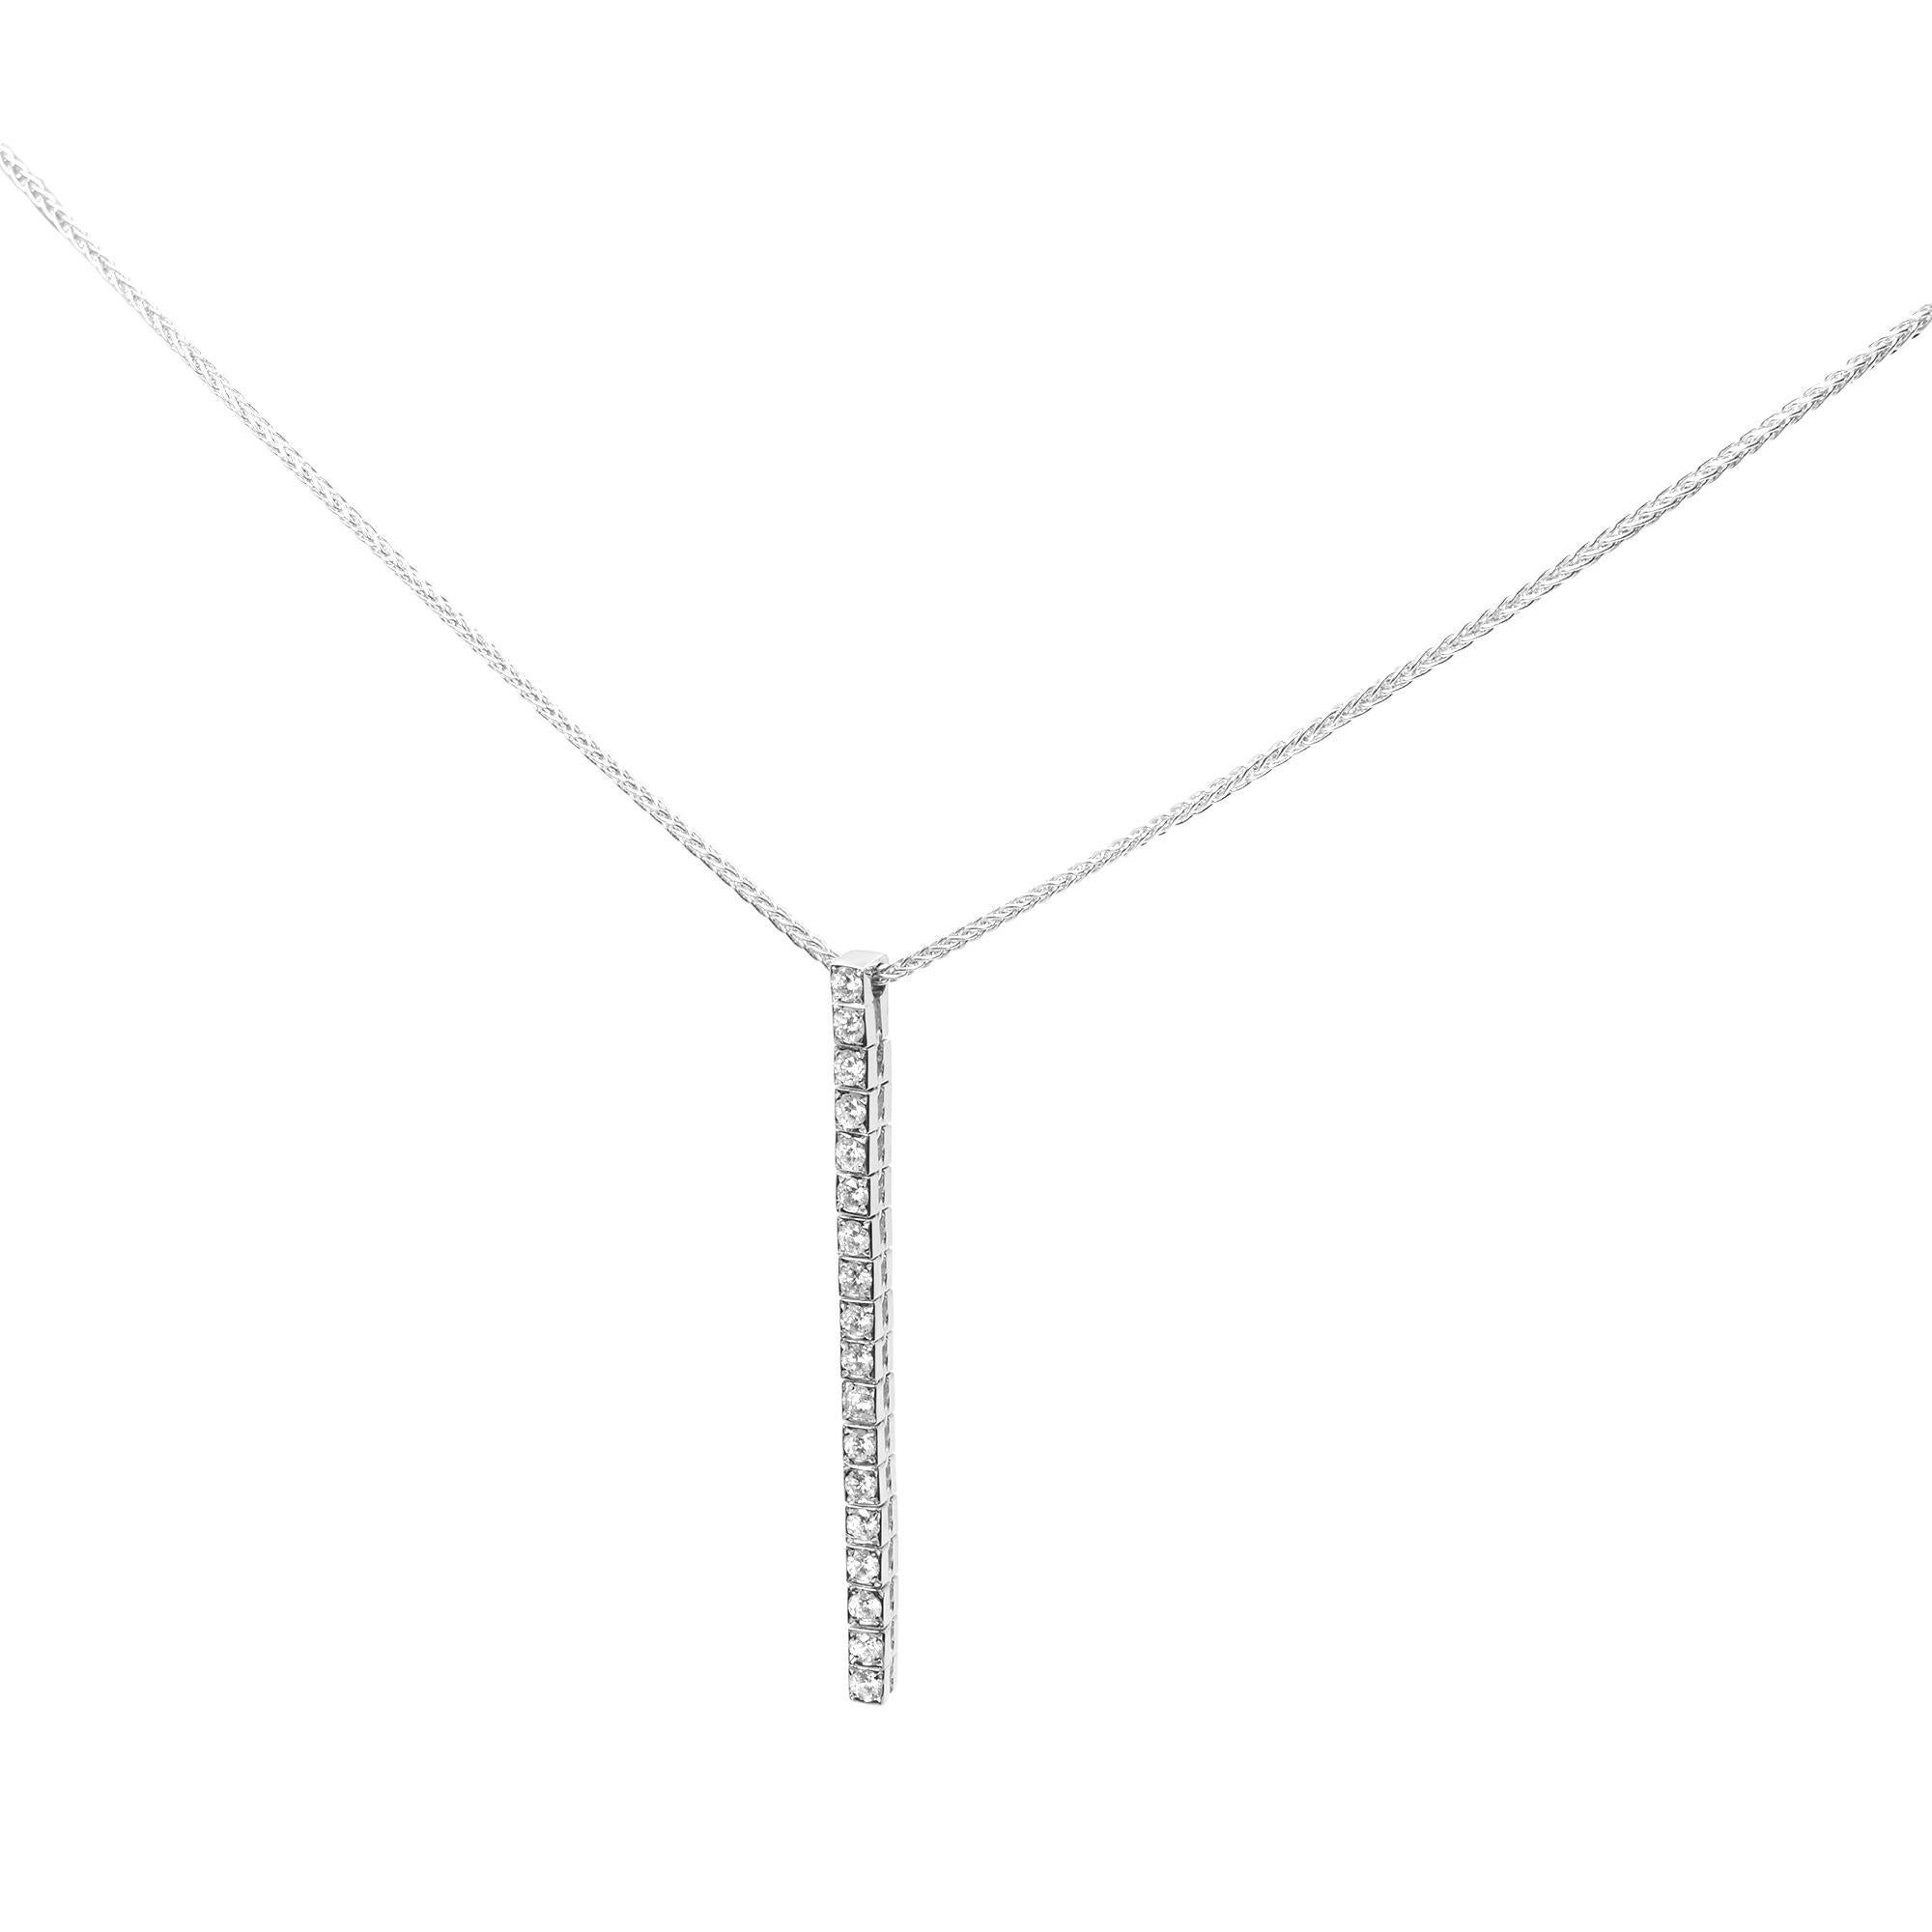 This is a Piero Milano 1 row natural diamond drop pendant necklace in 18K white gold. This elegant piece of jewelry is 16 inches long. Pendant size: 1.75 inches. Weights is 5.1 grams. Pendant is set with a total of 0.40cts. Diamond color G-H and